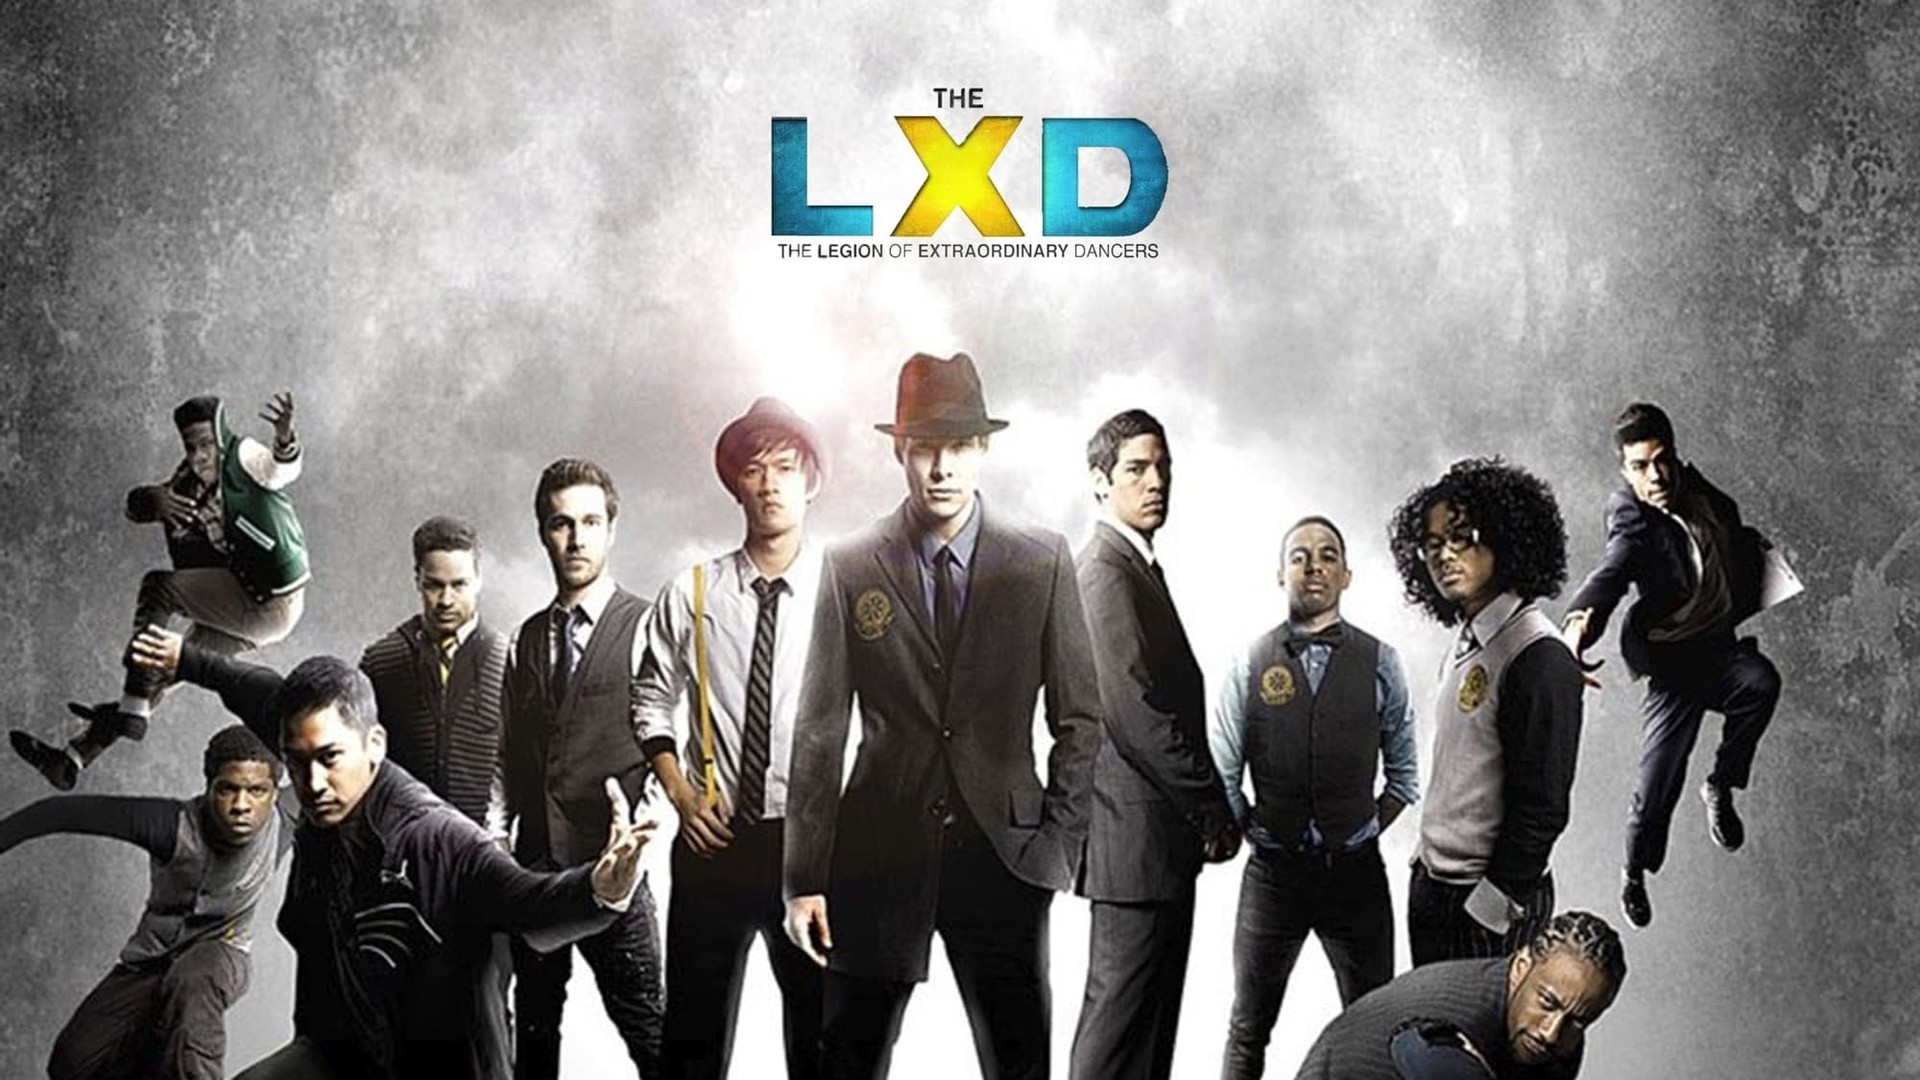 The LXD: The Legion of Extraordinary Dancers background